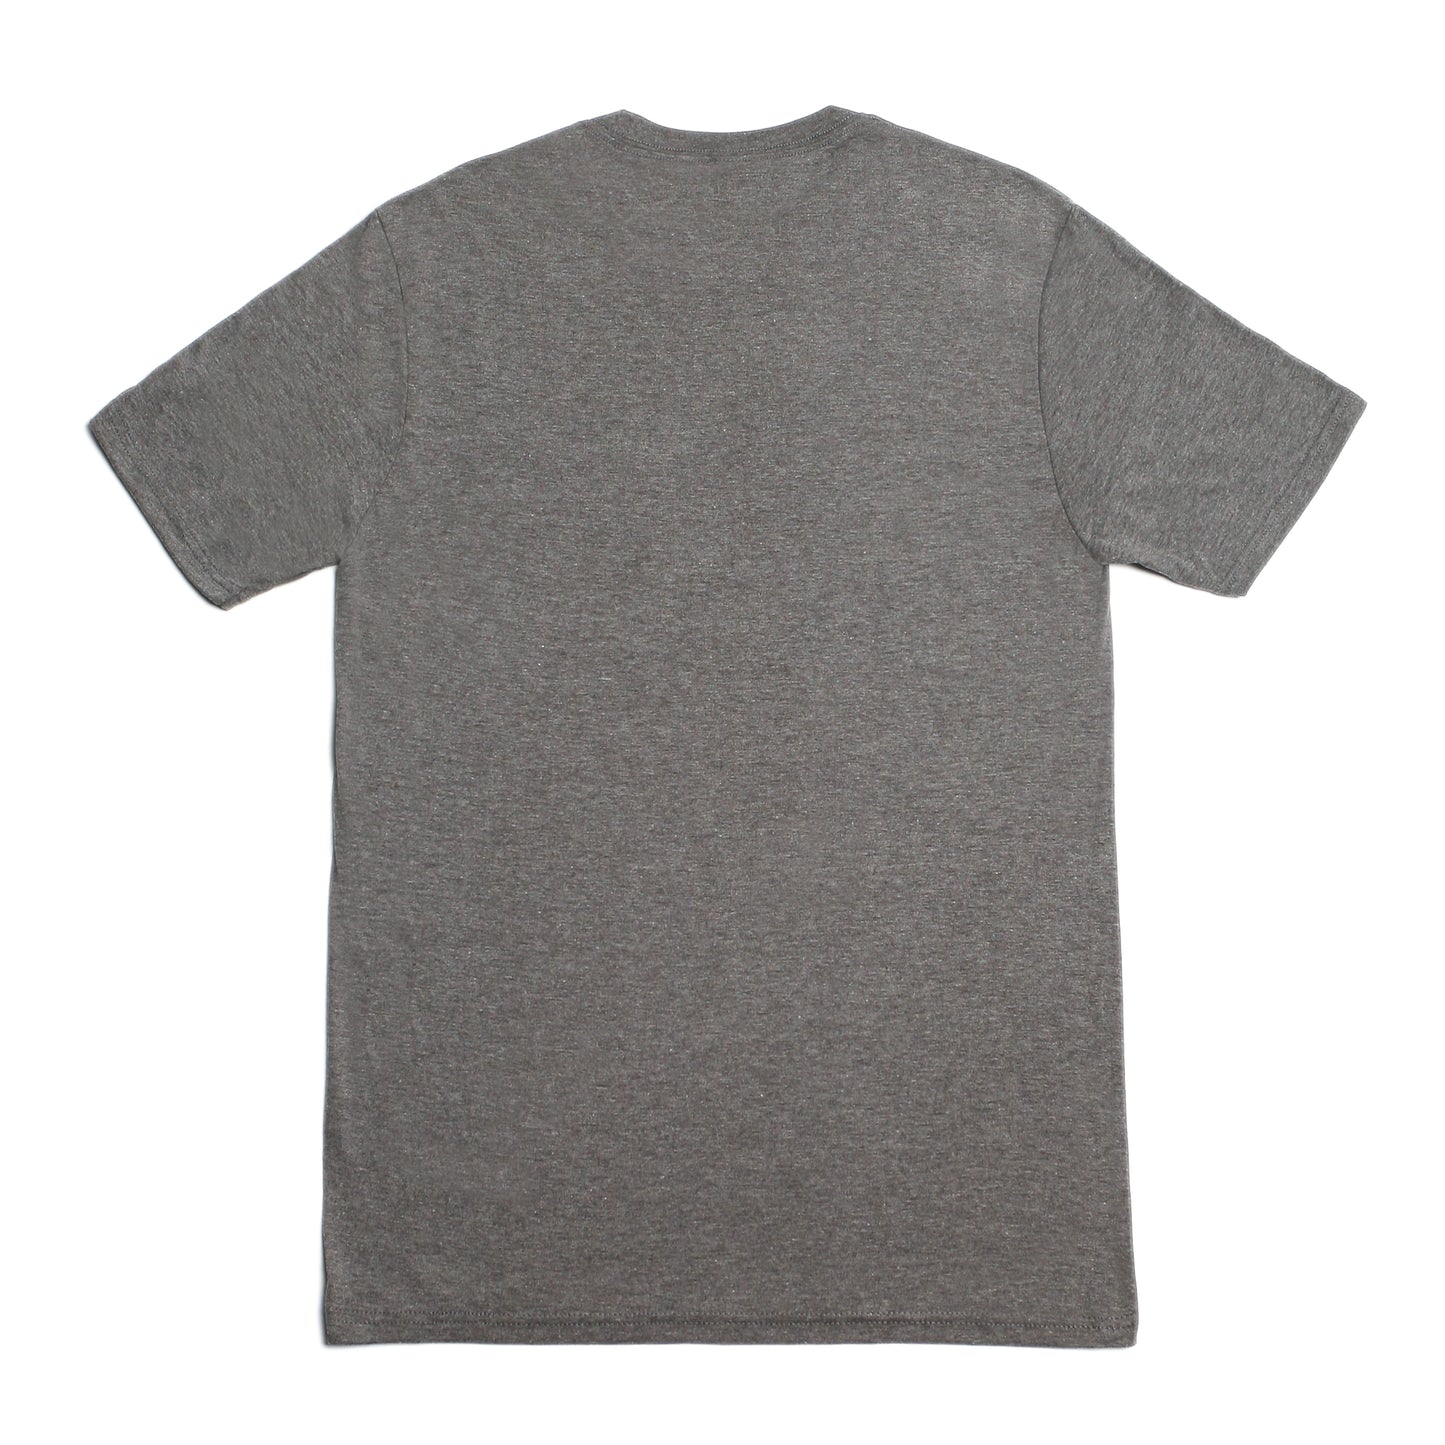 Knuckles Tee - Grey/White